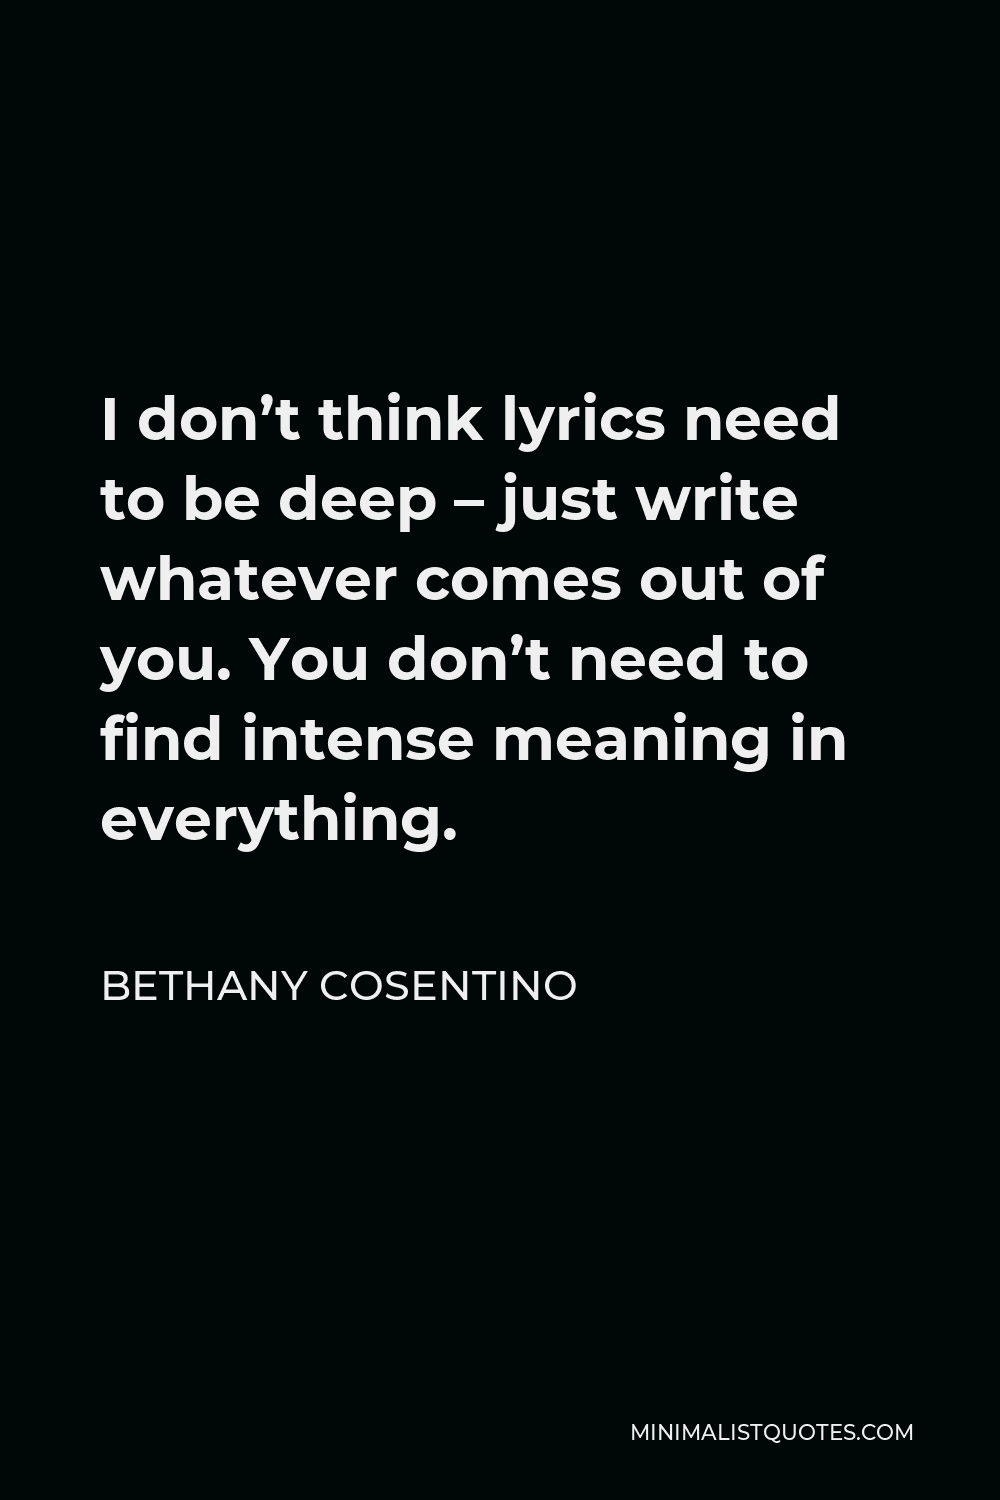 Bethany Cosentino Quote - I don’t think lyrics need to be deep – just write whatever comes out of you. You don’t need to find intense meaning in everything.